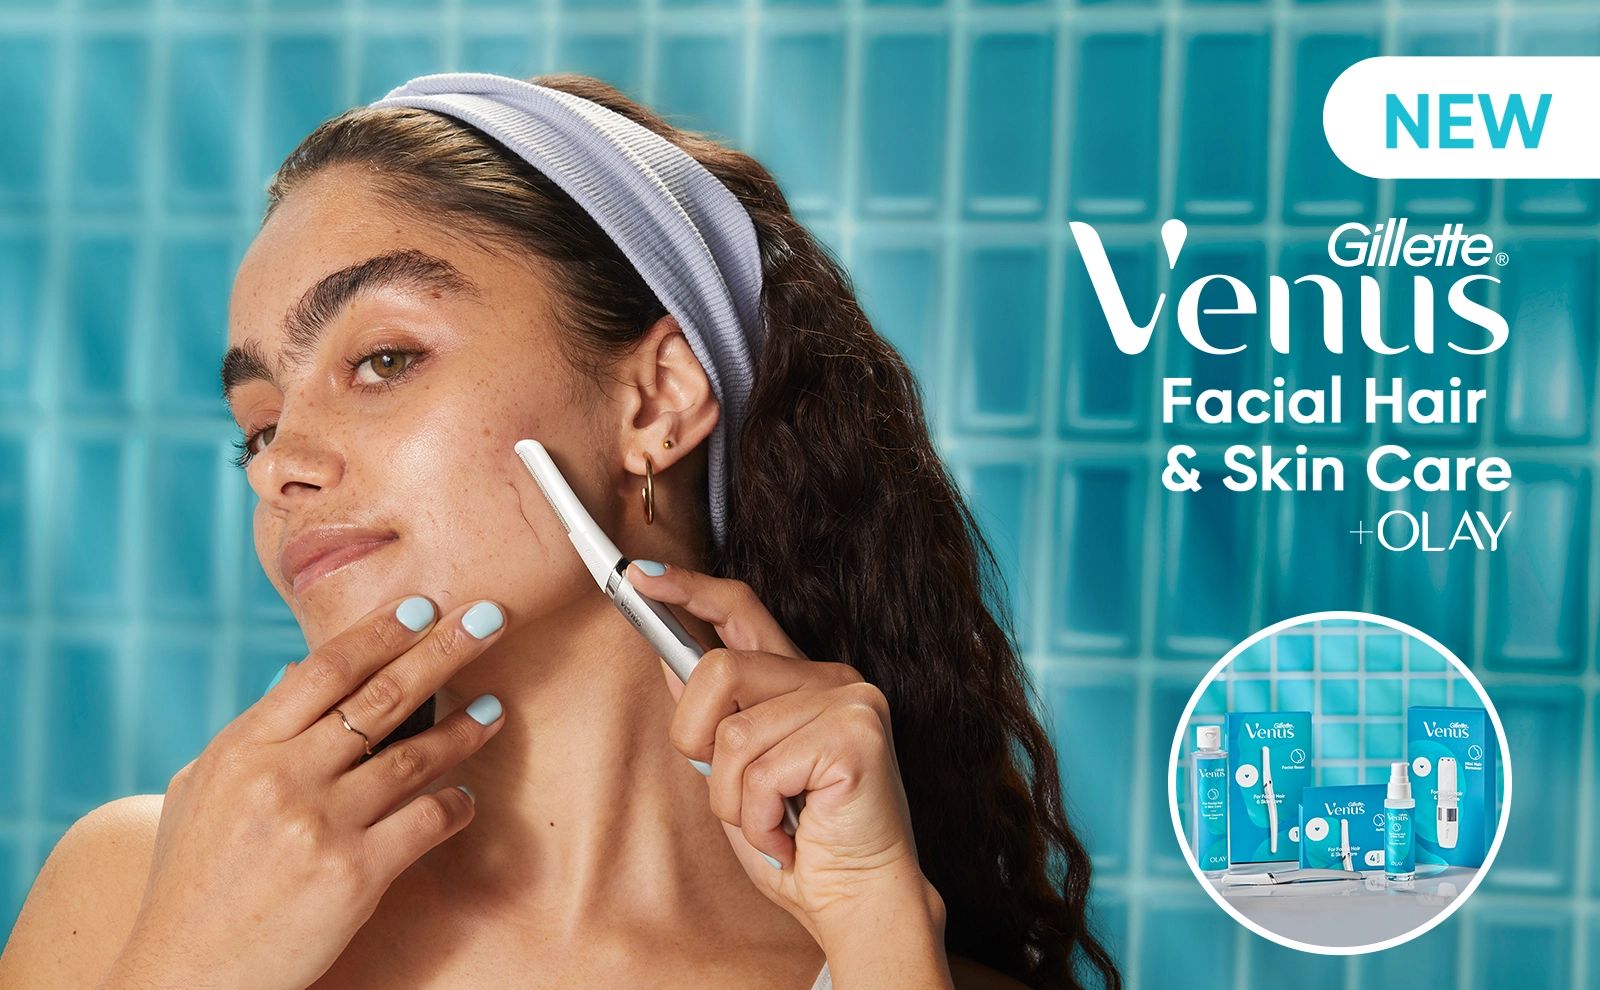 New. Gillette Venus Facial Hair and Skin Care and Olay.